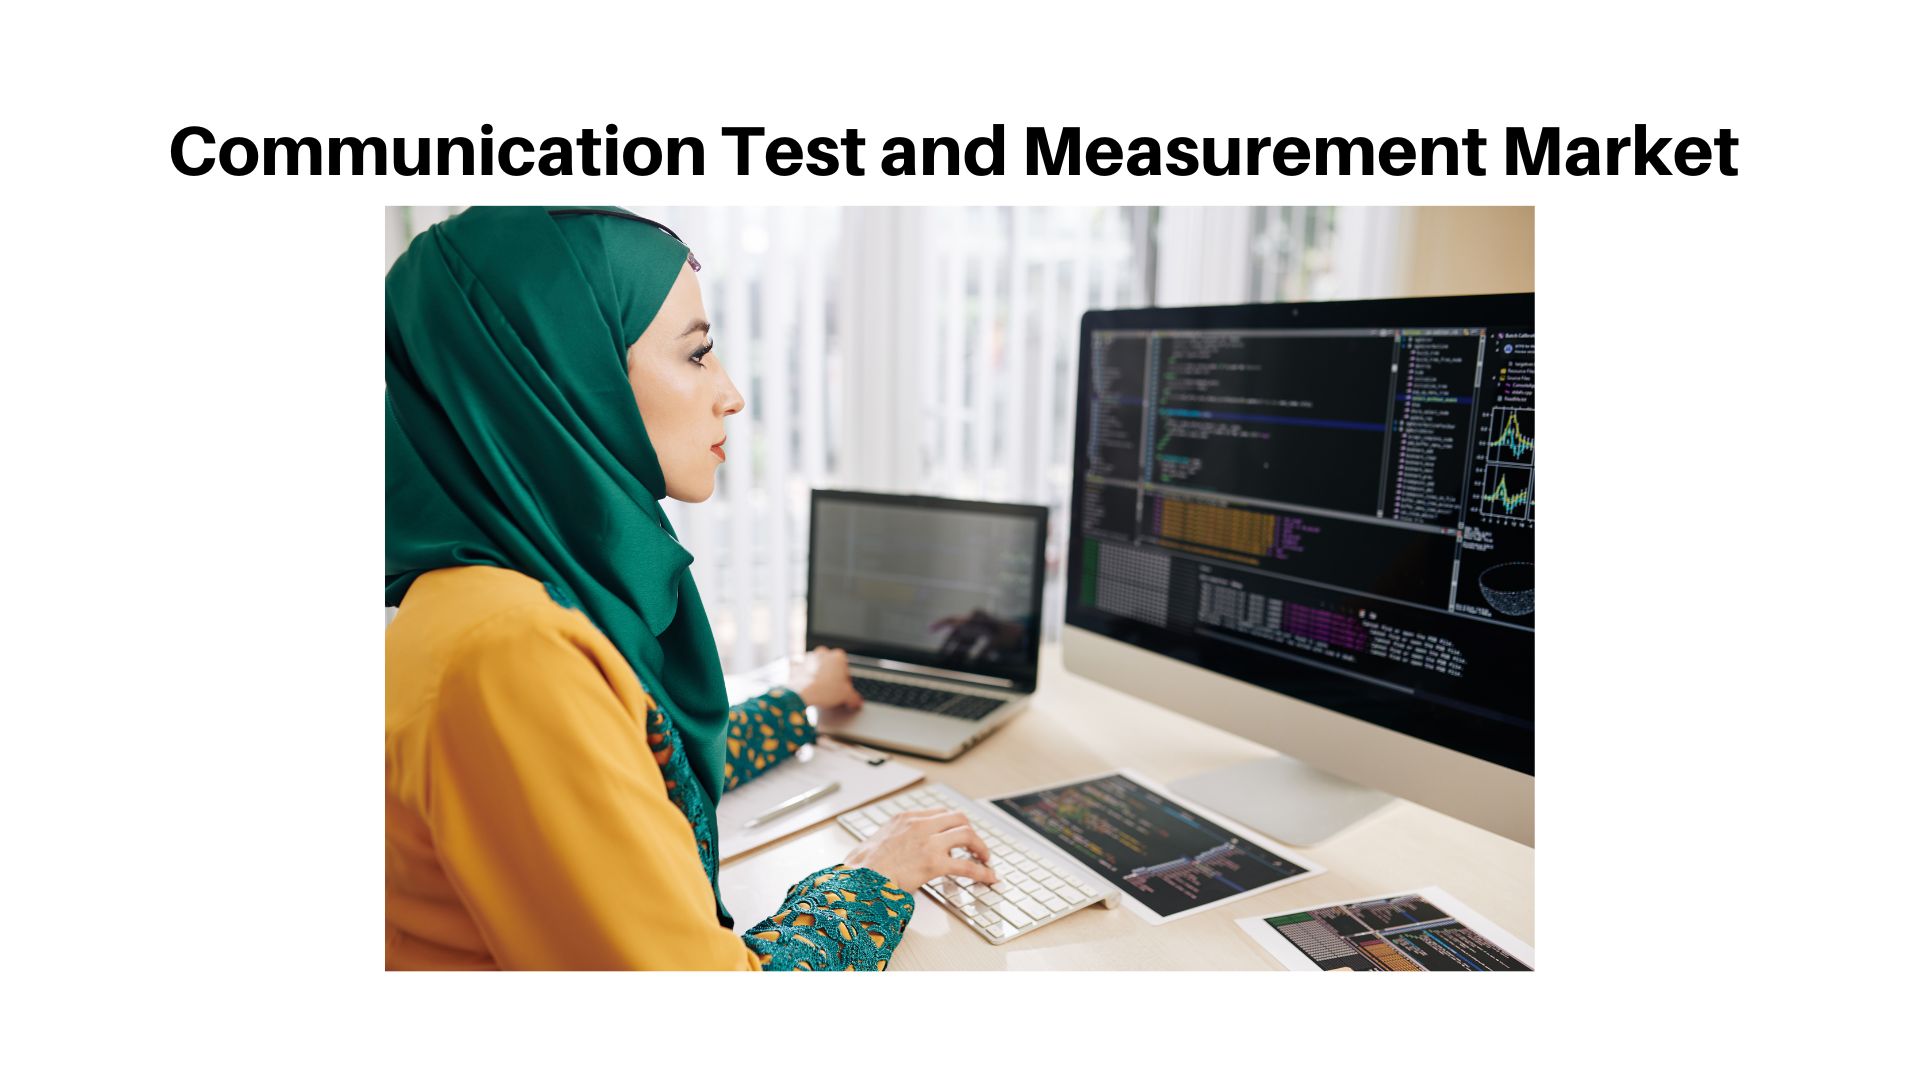 Communication Test and Measurement Market To Make Great Impact USD 20.17 Bn In Near Future by 2033